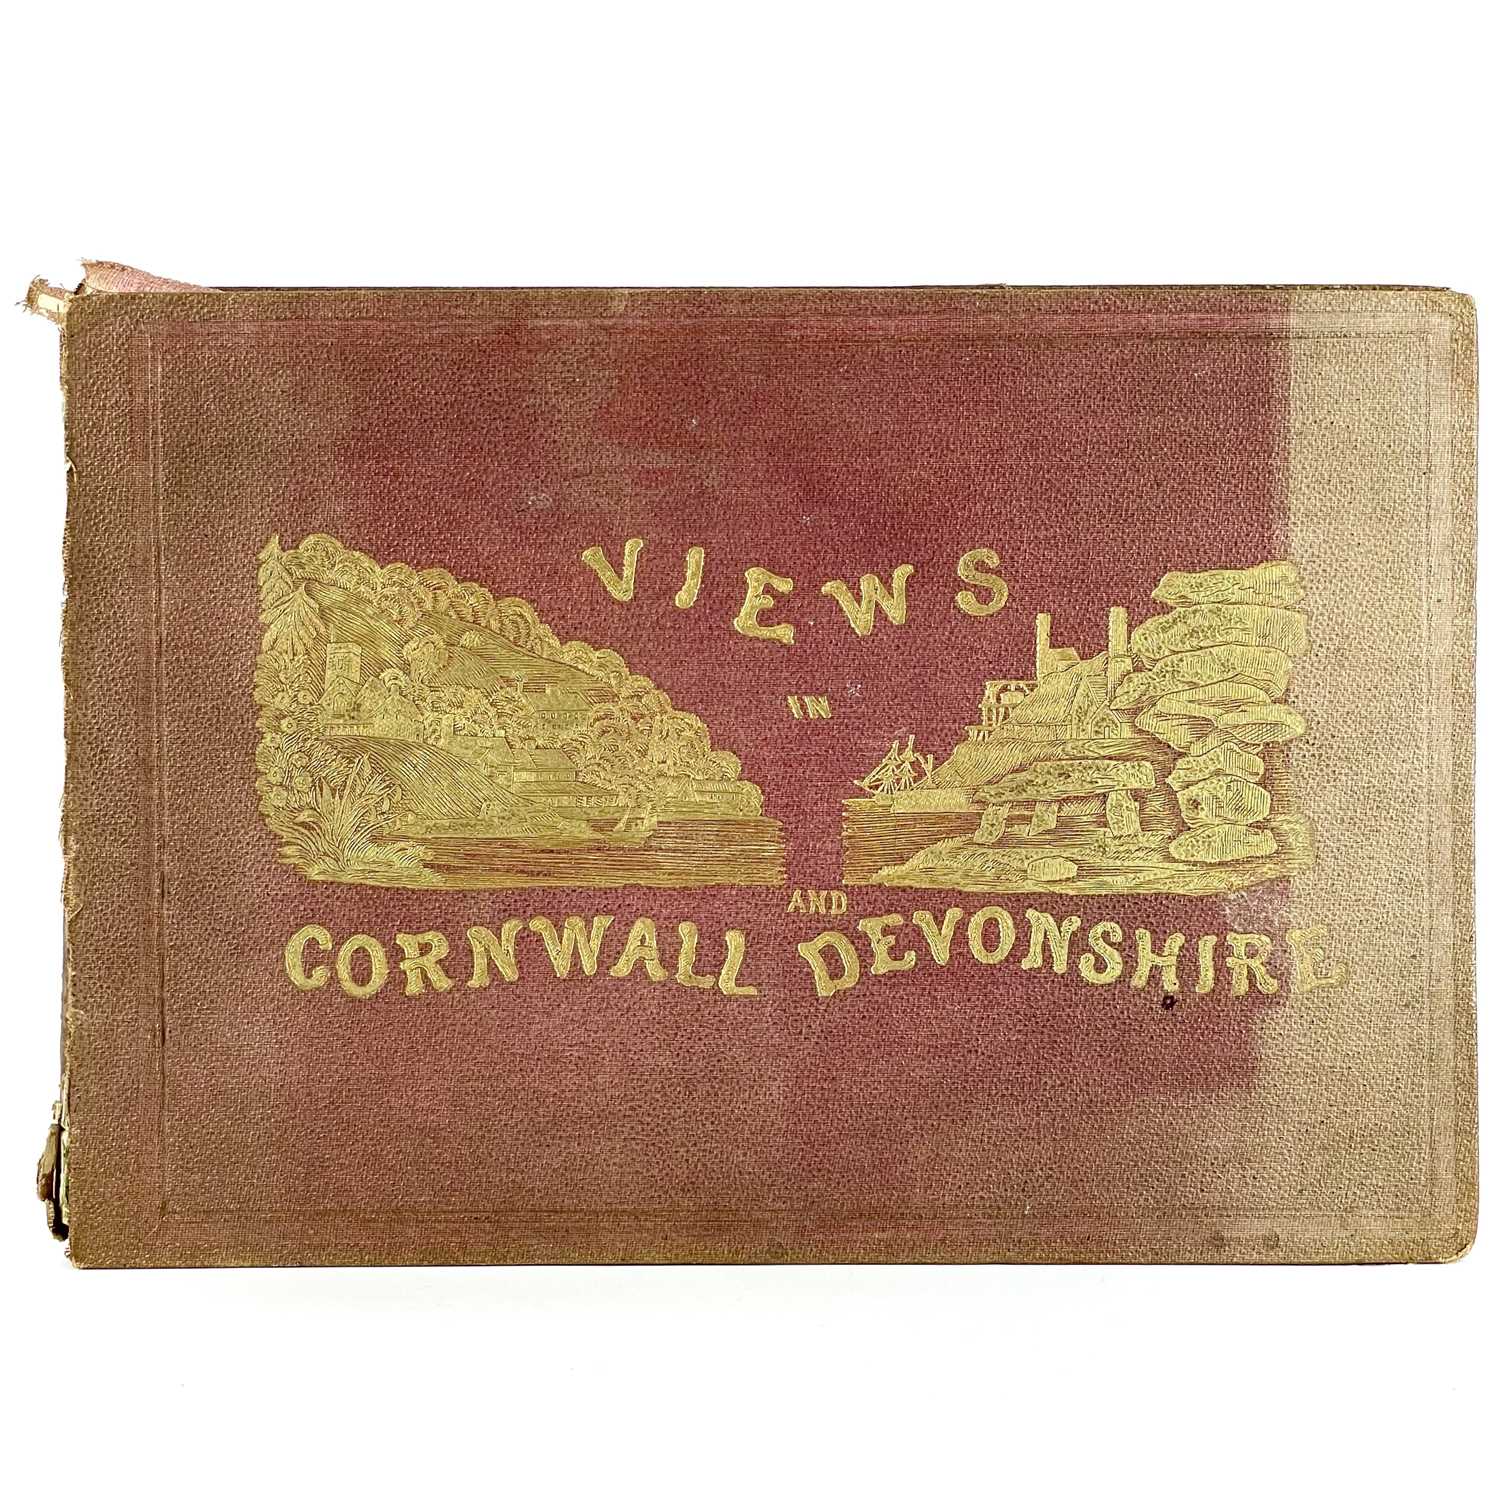 Henry Besley (pub). 'Views in Cornwall and Devonshire'.